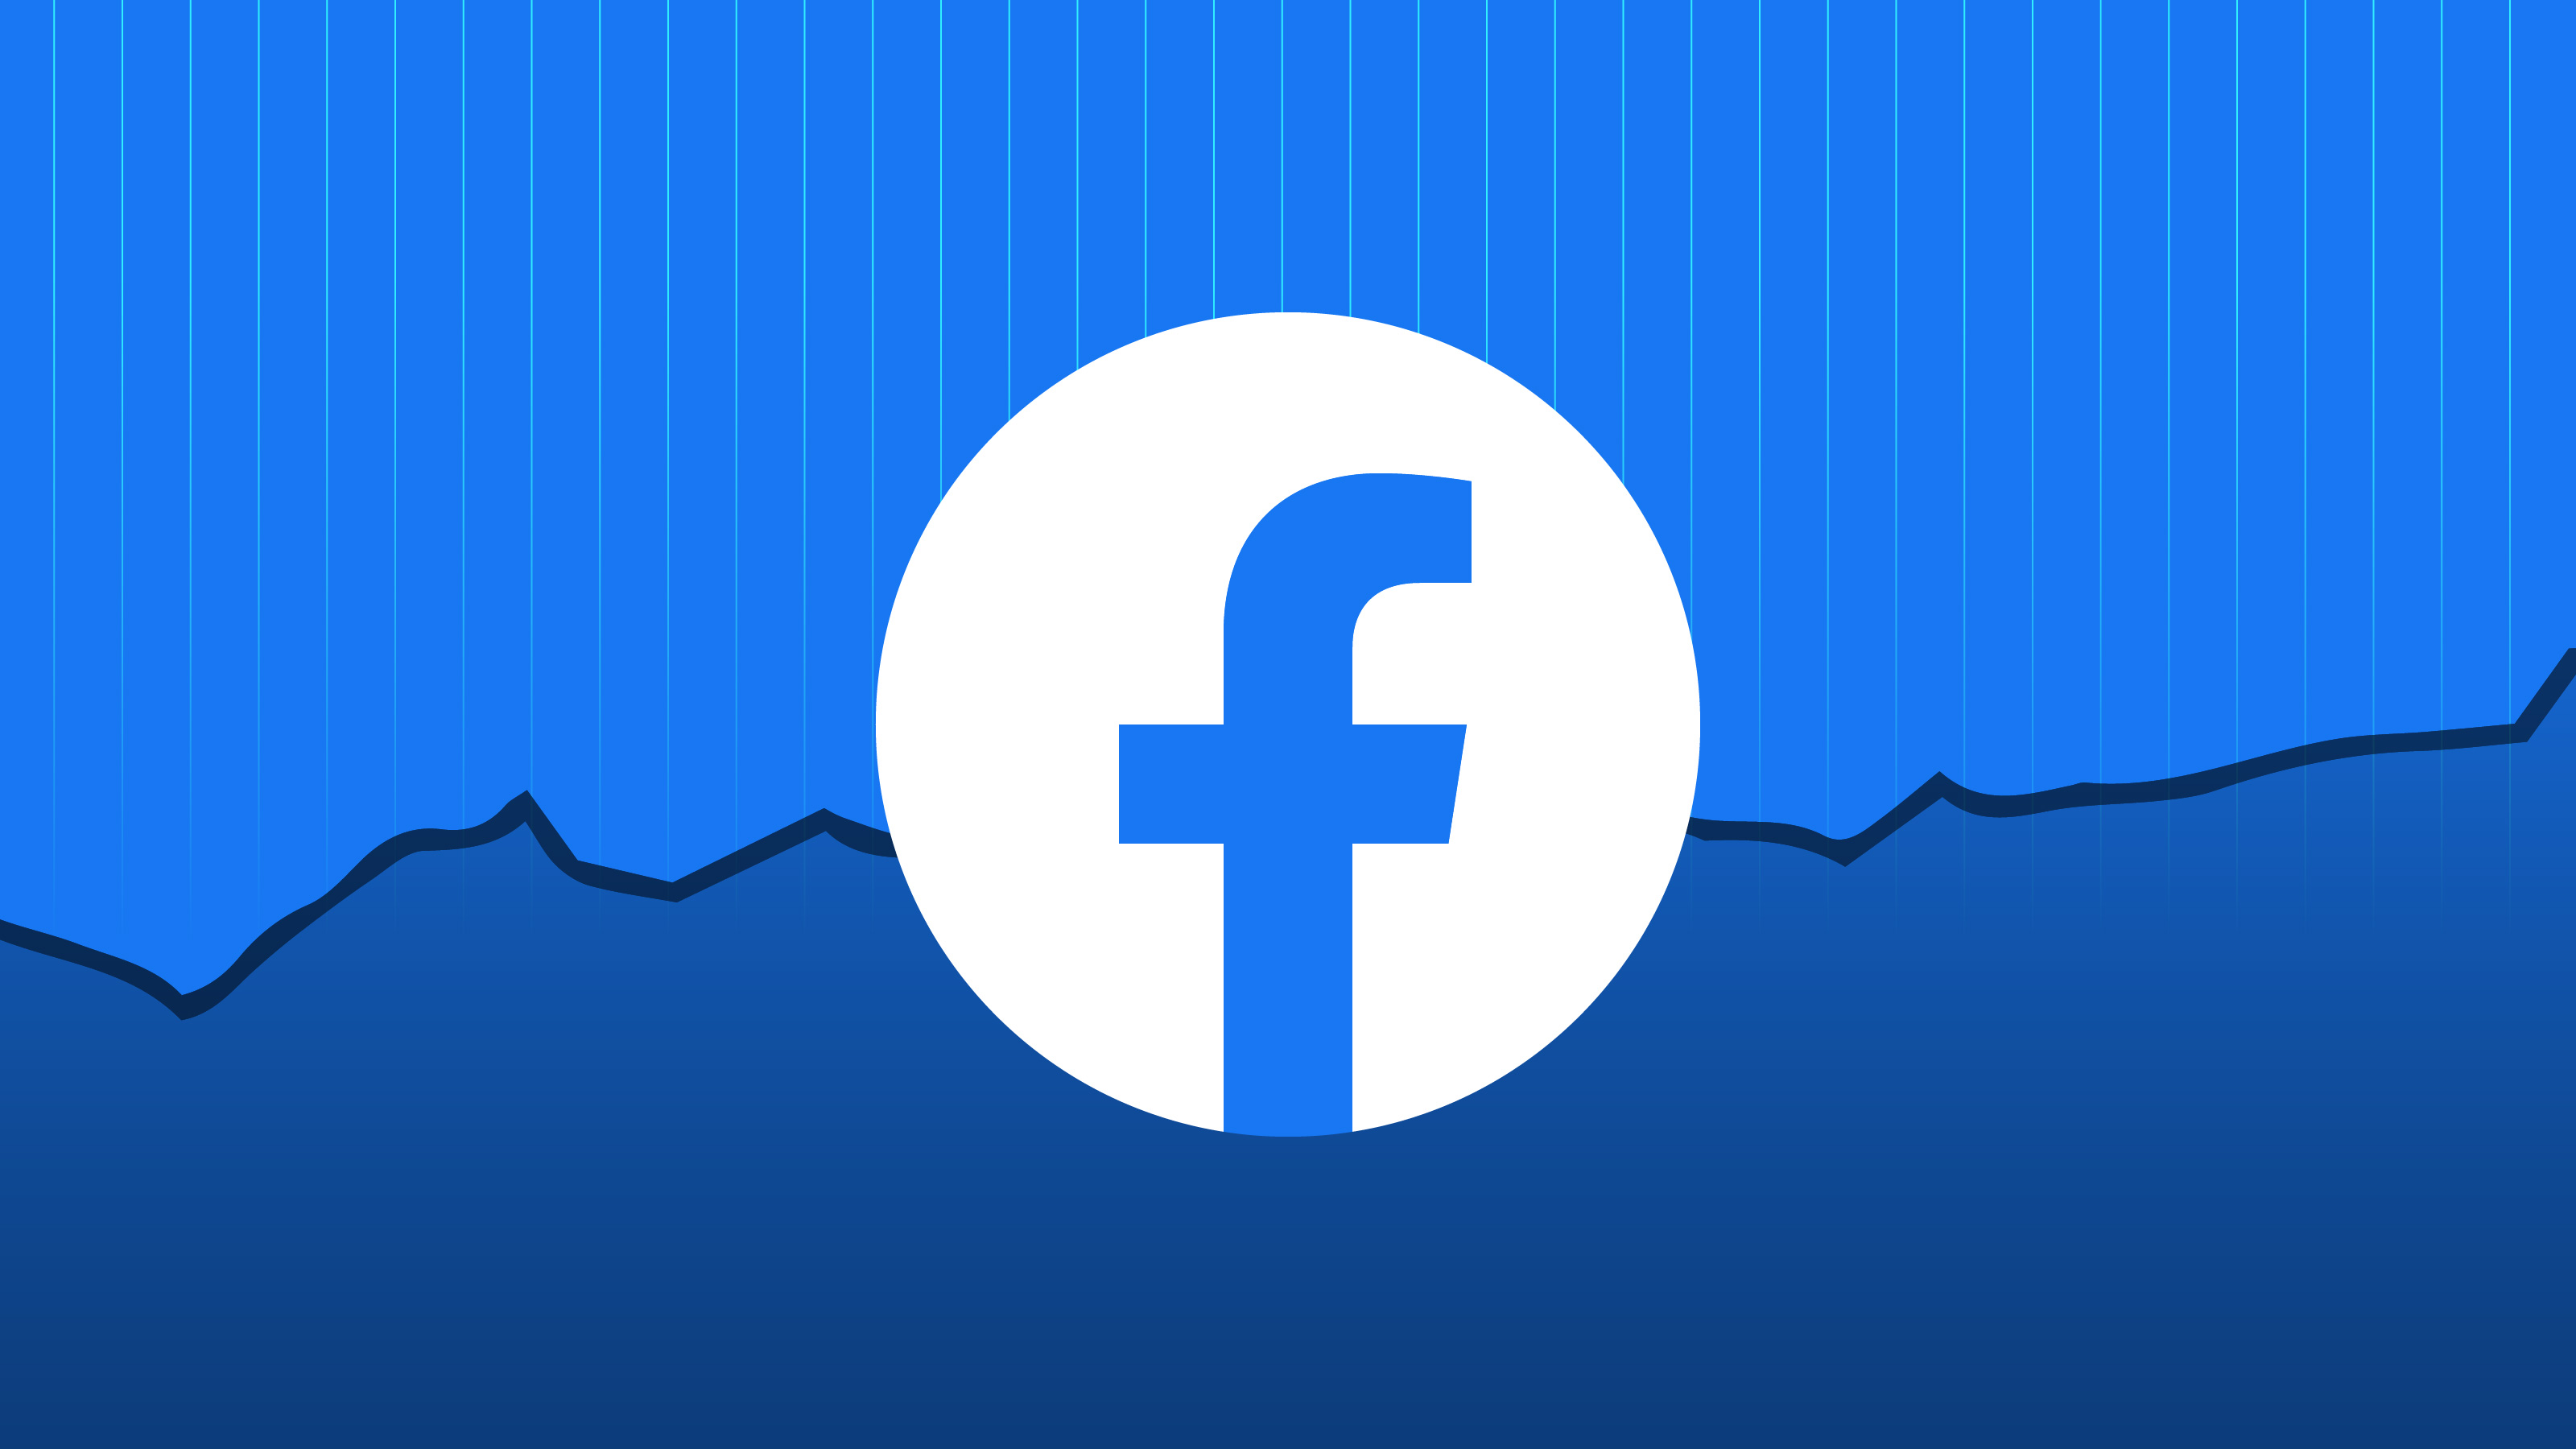 Facebook warns of 'headwinds' to its ad business from regulators and Apple | TechCrunch